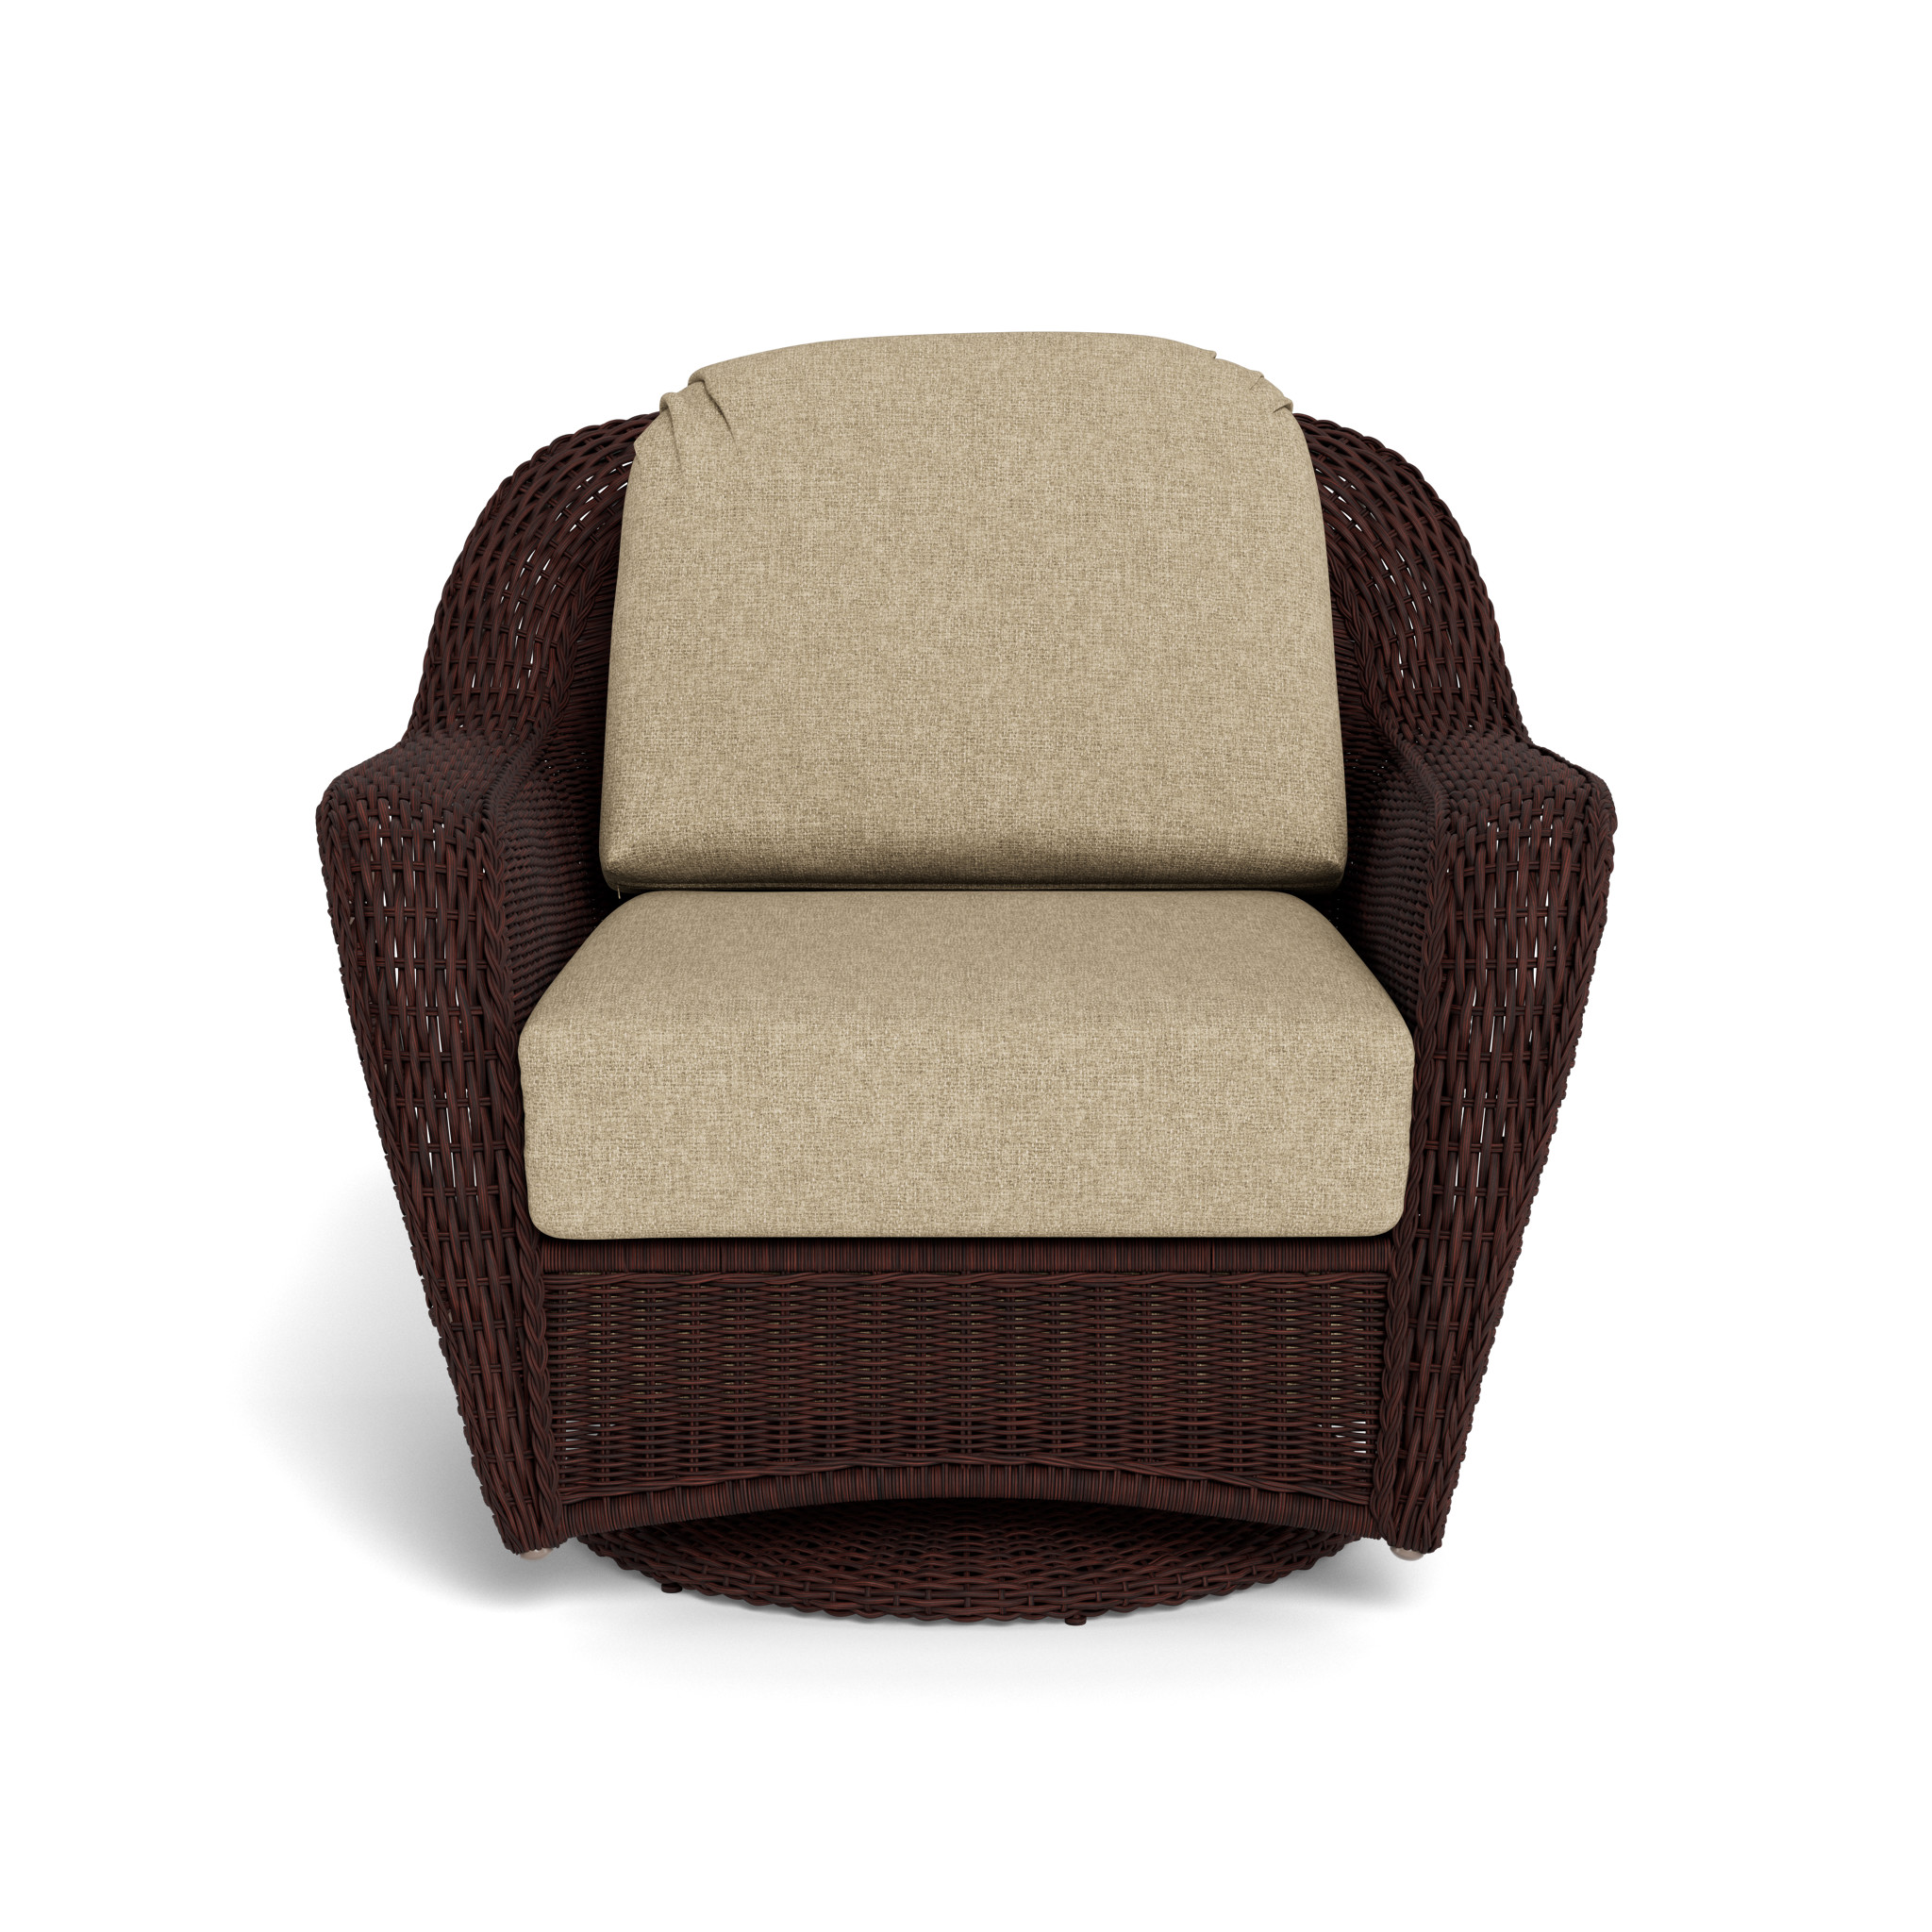 Sea Pines Swivel Glider Club Chair, Java, Canvas Natural - image 2 of 5